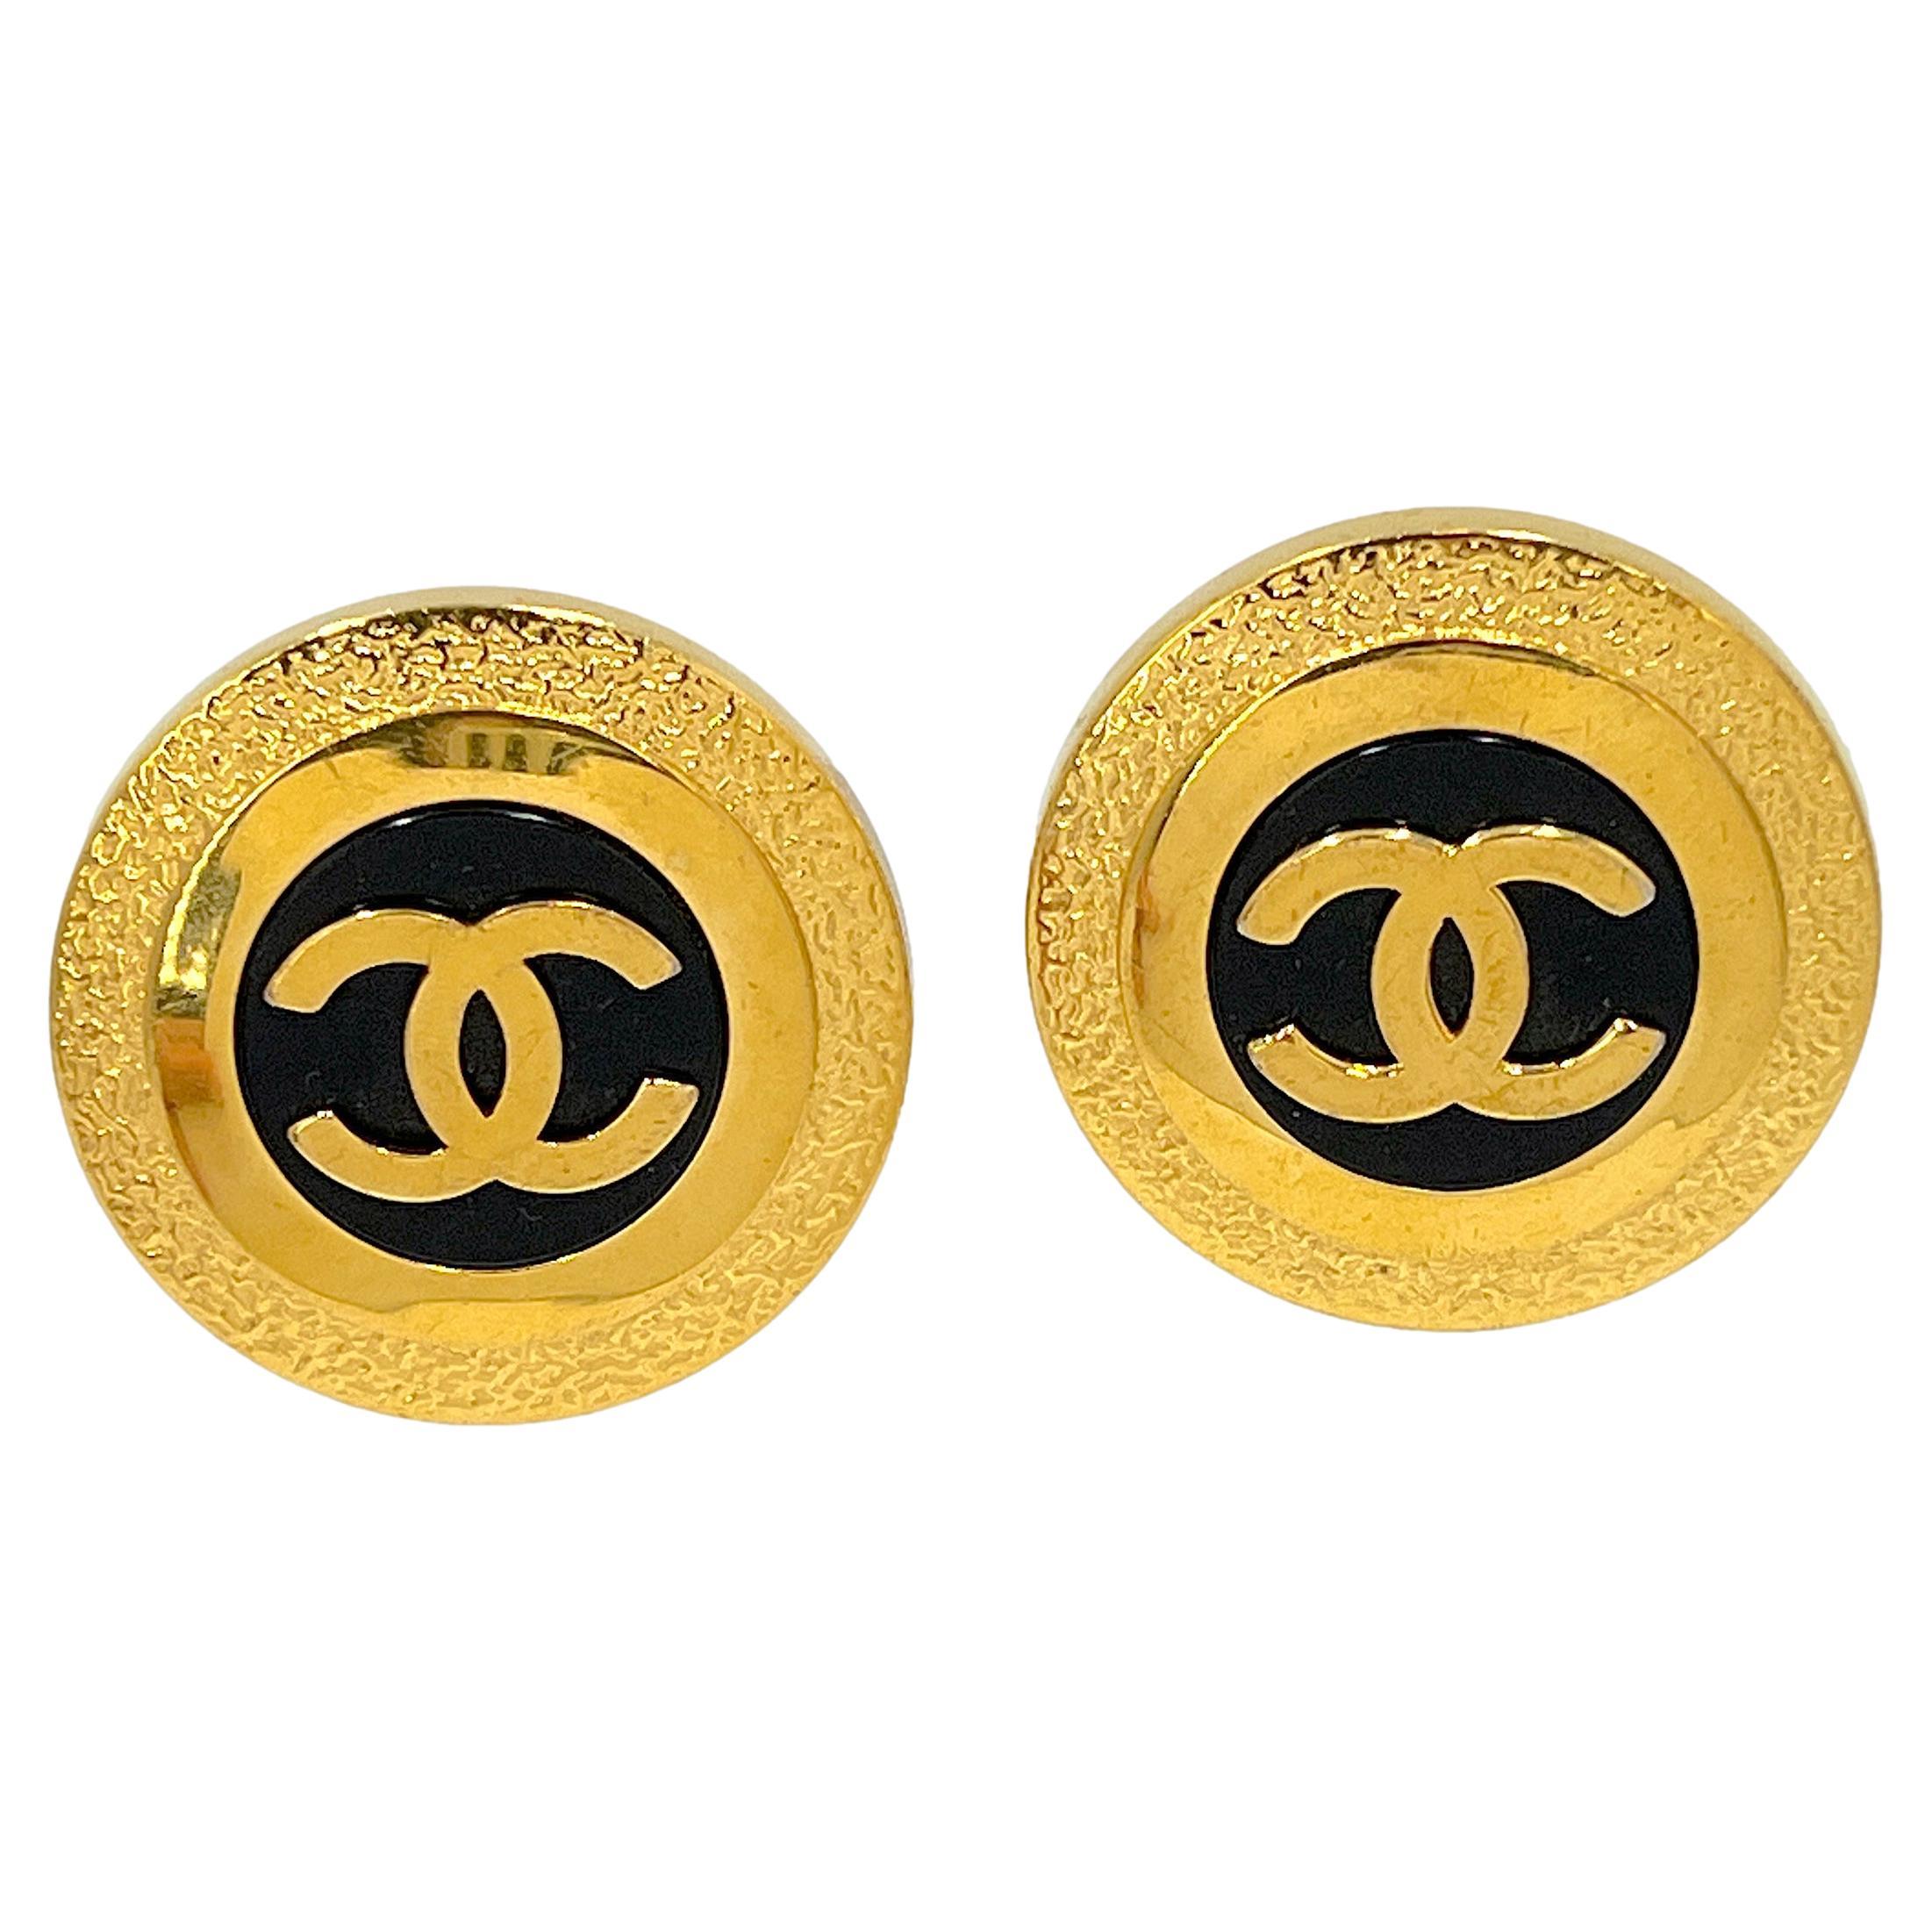 Chanel 95A Crystal Studded Silver Classic Turnlock Stud Earrings